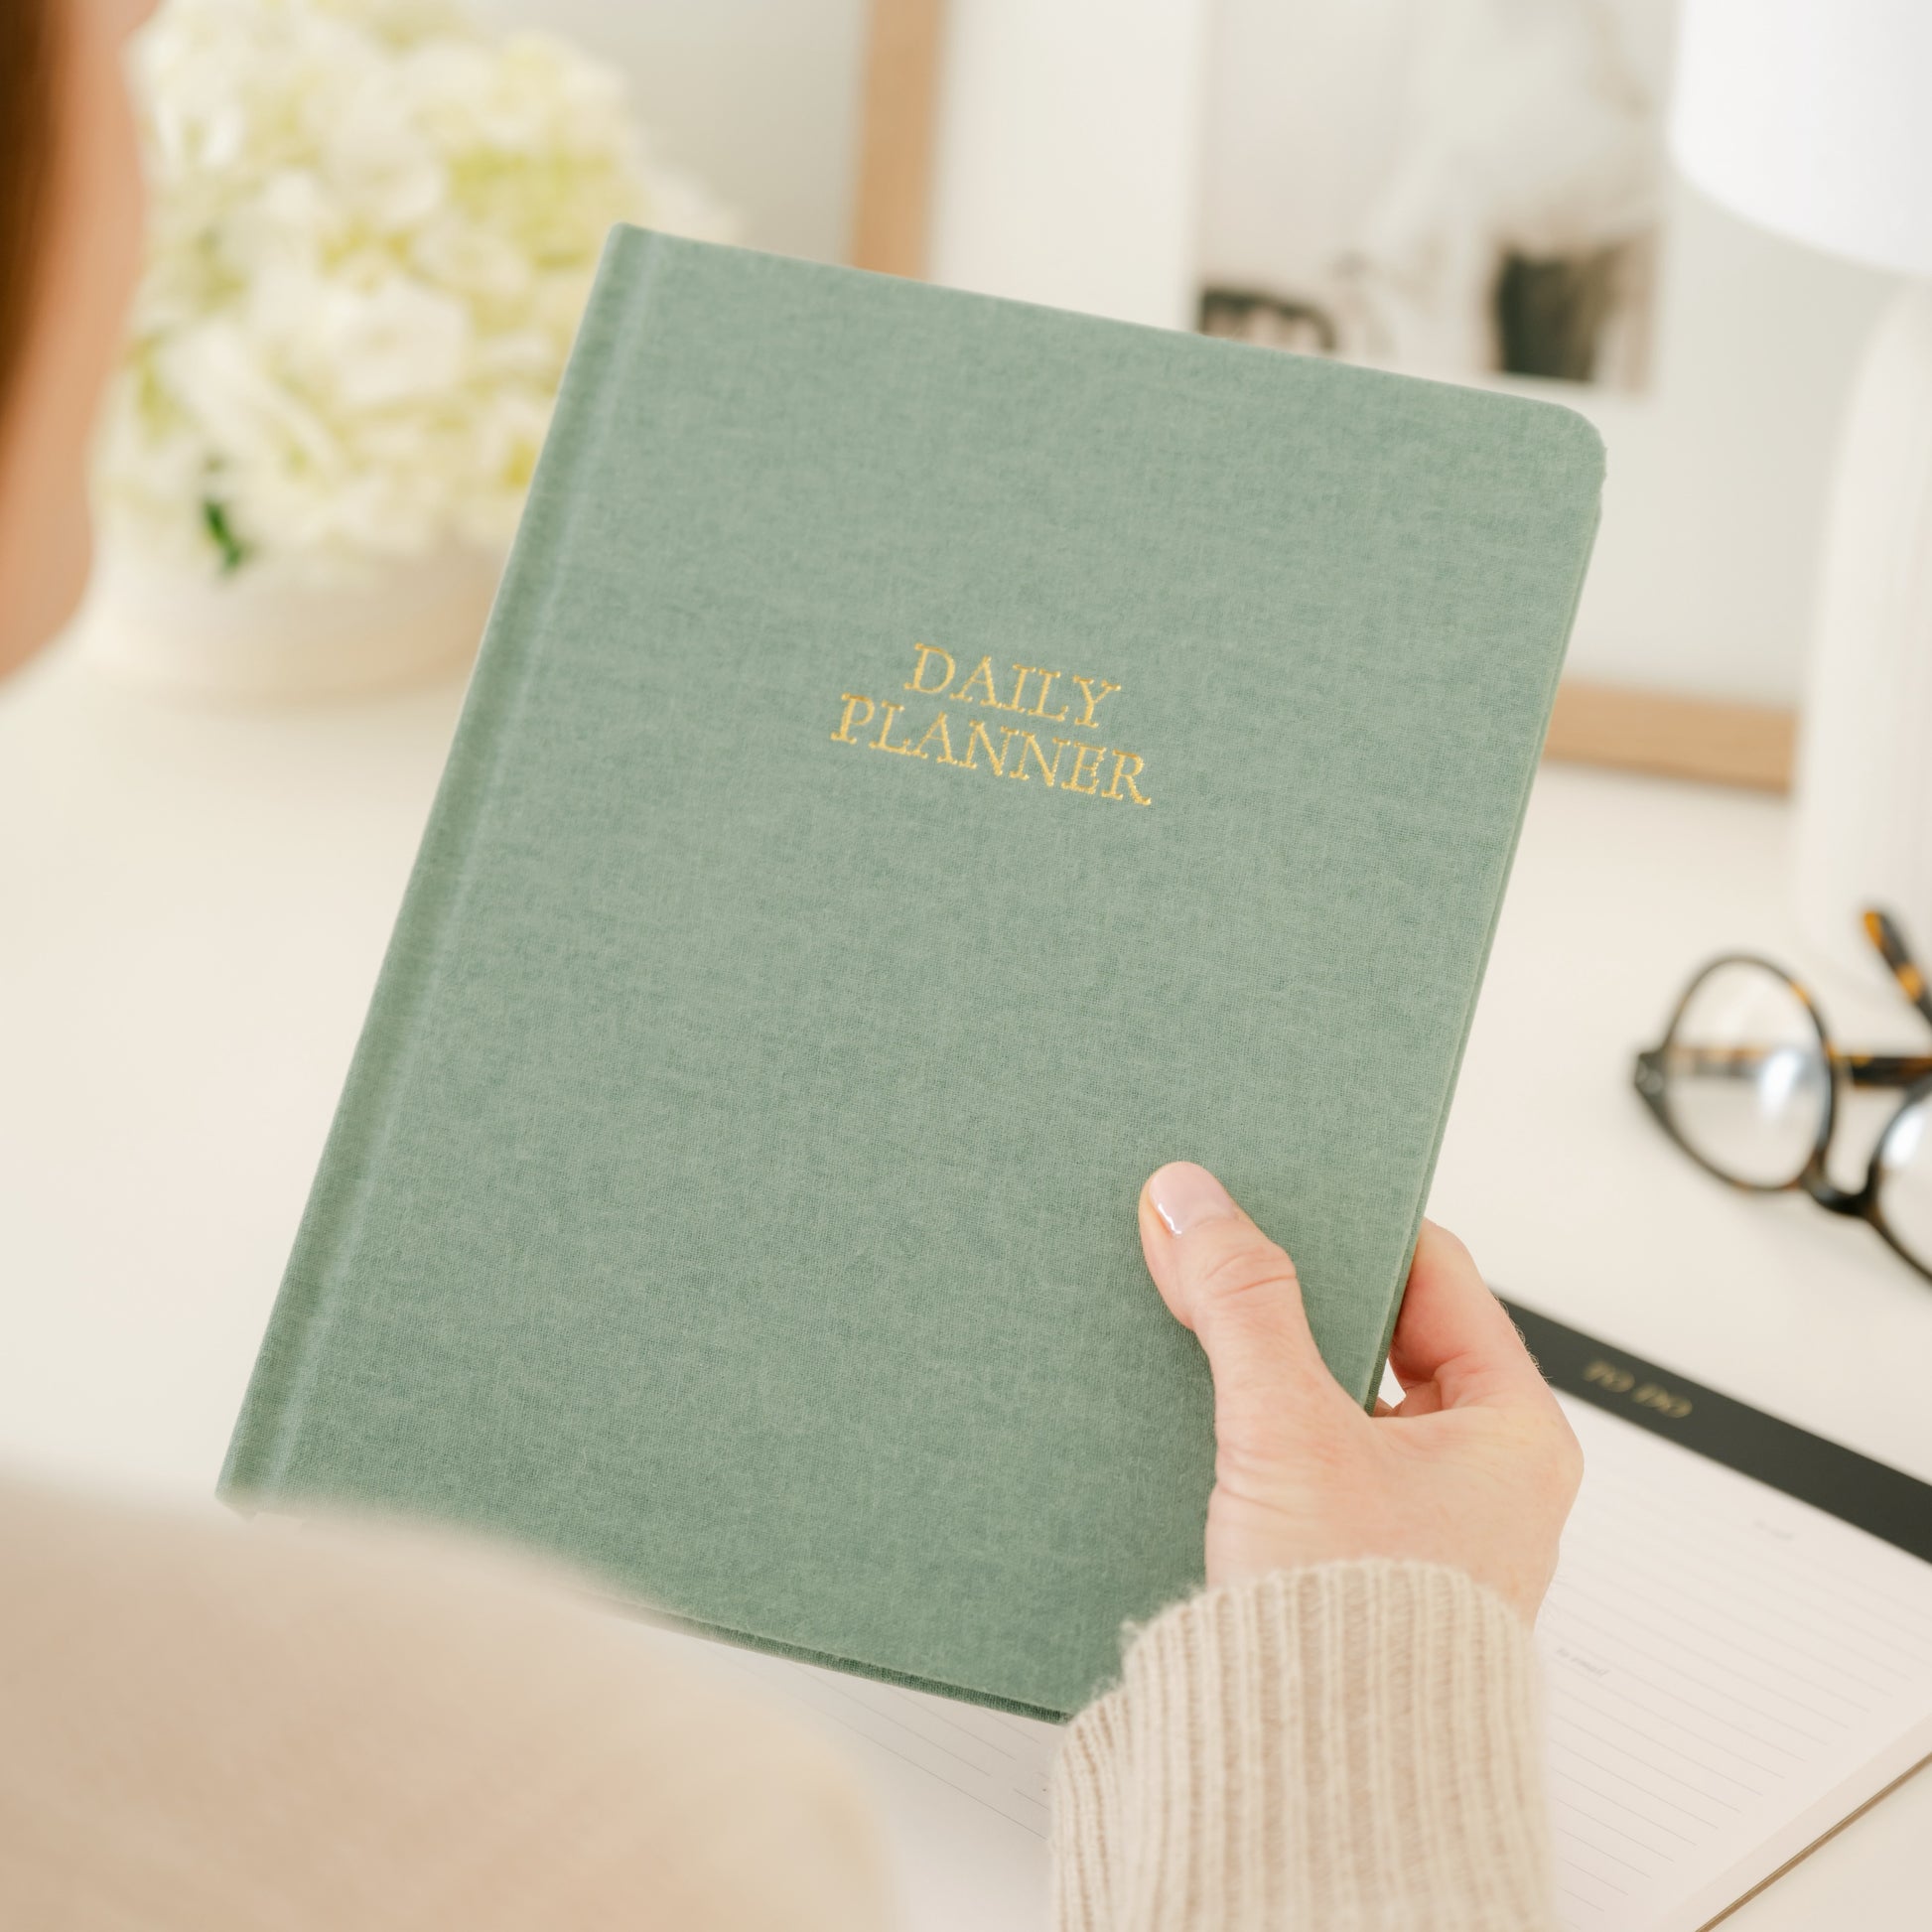 Daily sage green planner in hands